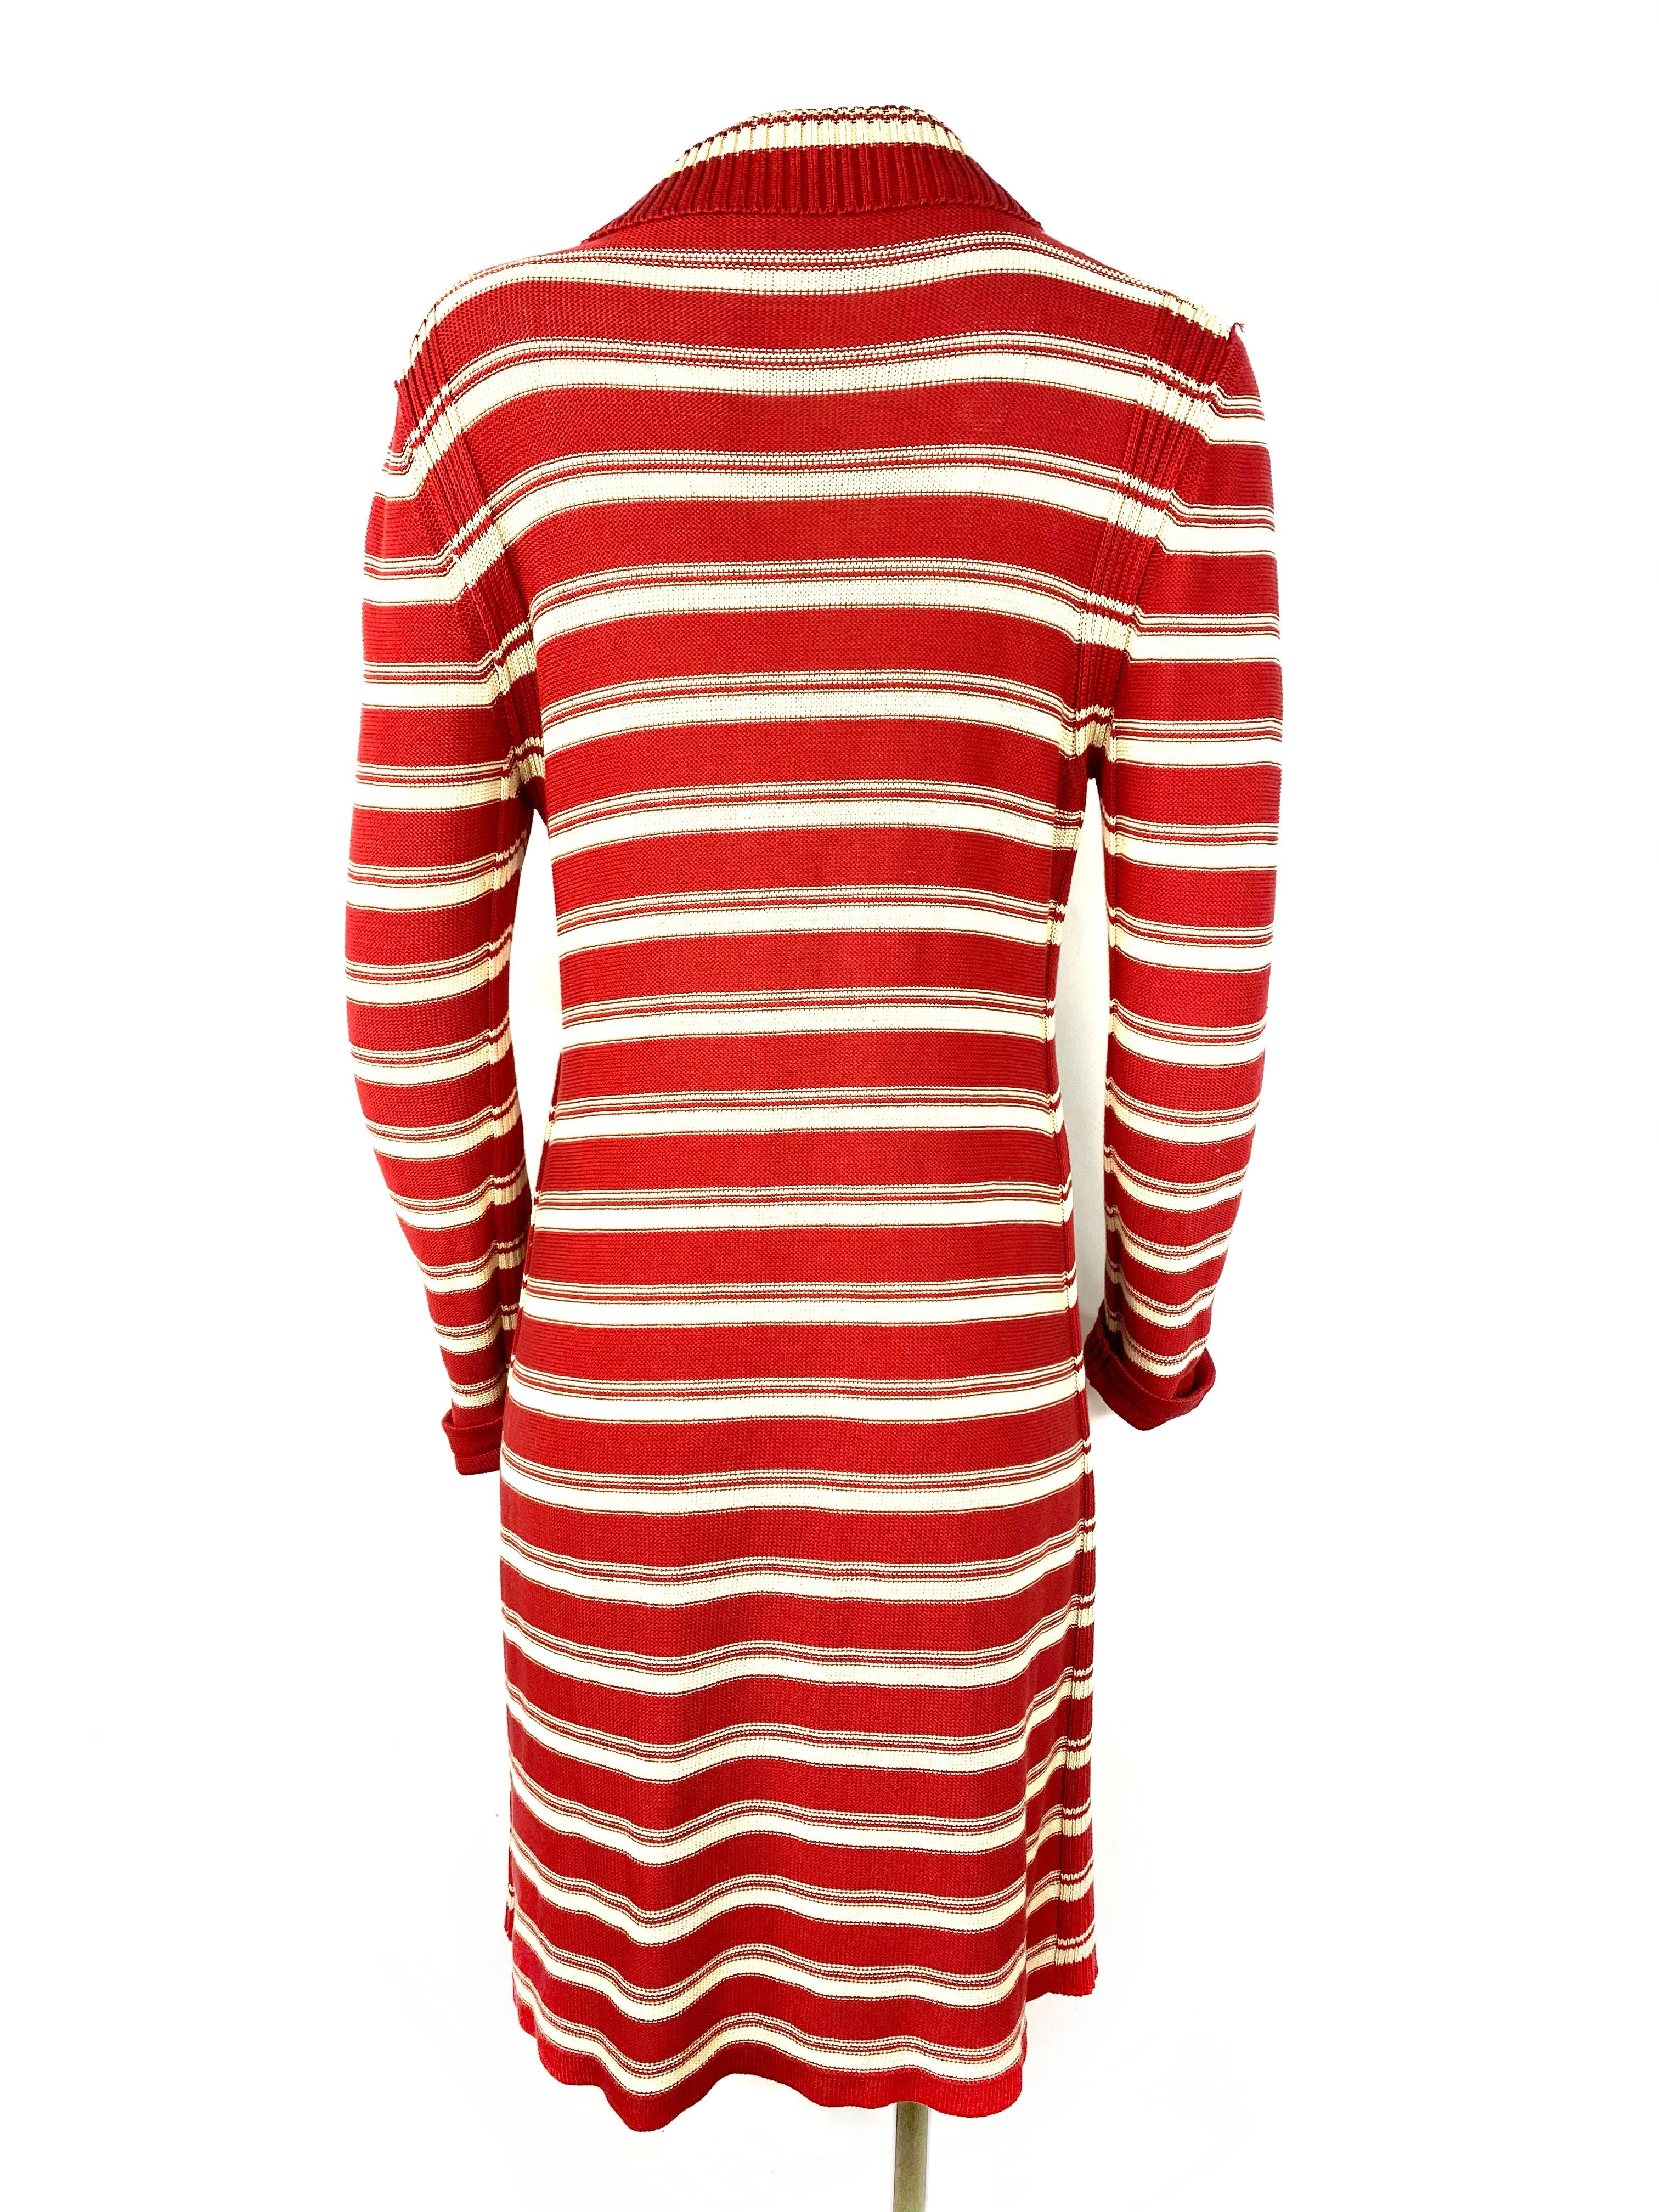 Women's Sonia Rykiel Paris Red and White Knit Cotton Cardigan Sweater, Size 42 For Sale